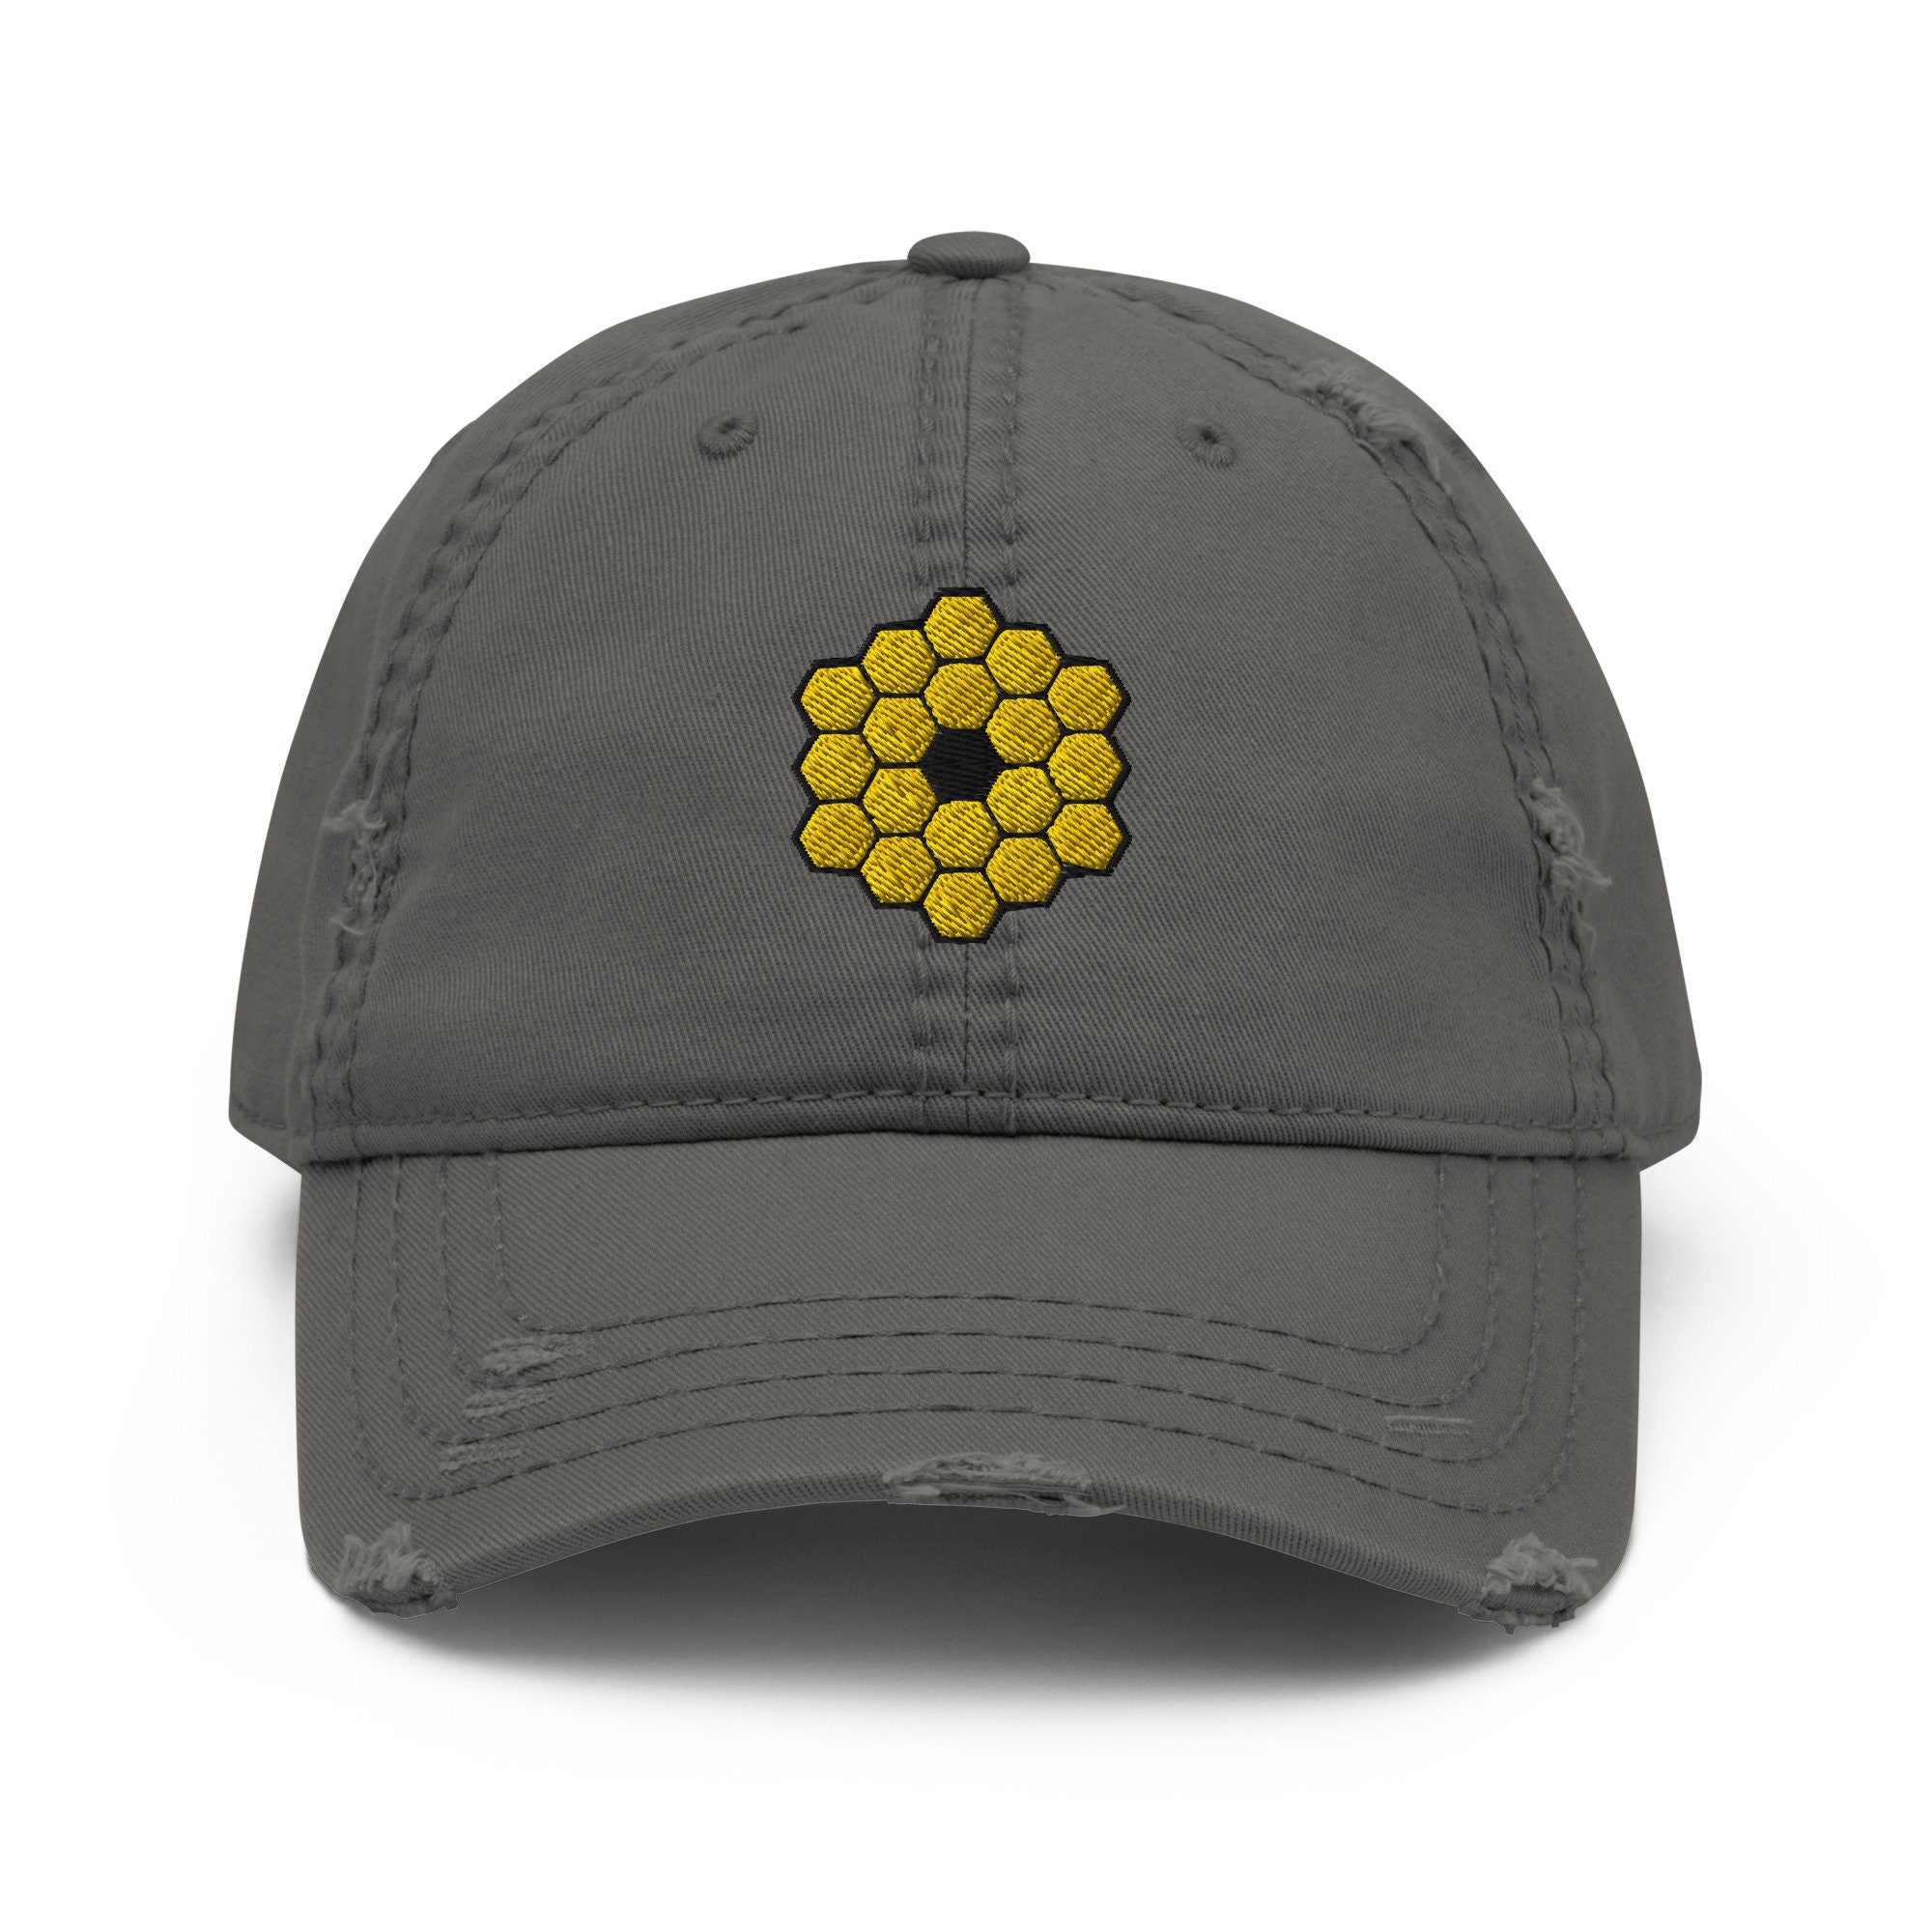 James Webb Space Telescope JWST Distressed Father's Day Embroidered Hat